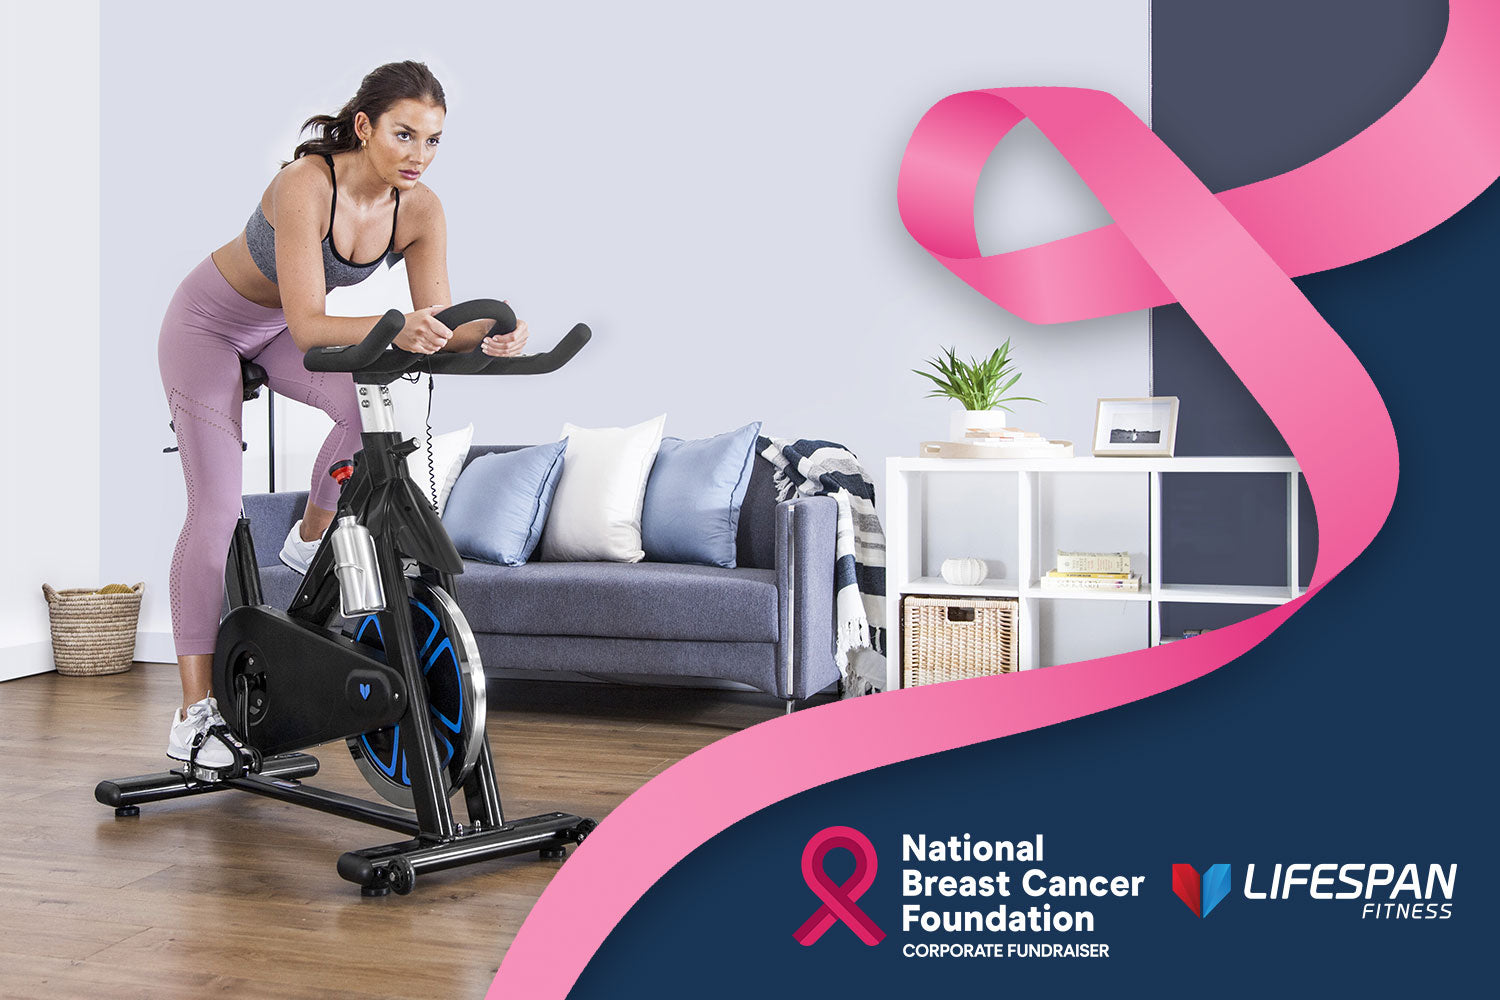 Lifespan Fitness partners with the National Breast Cancer Foundation once again for their 'Step Up to Breast Cancer' challenge